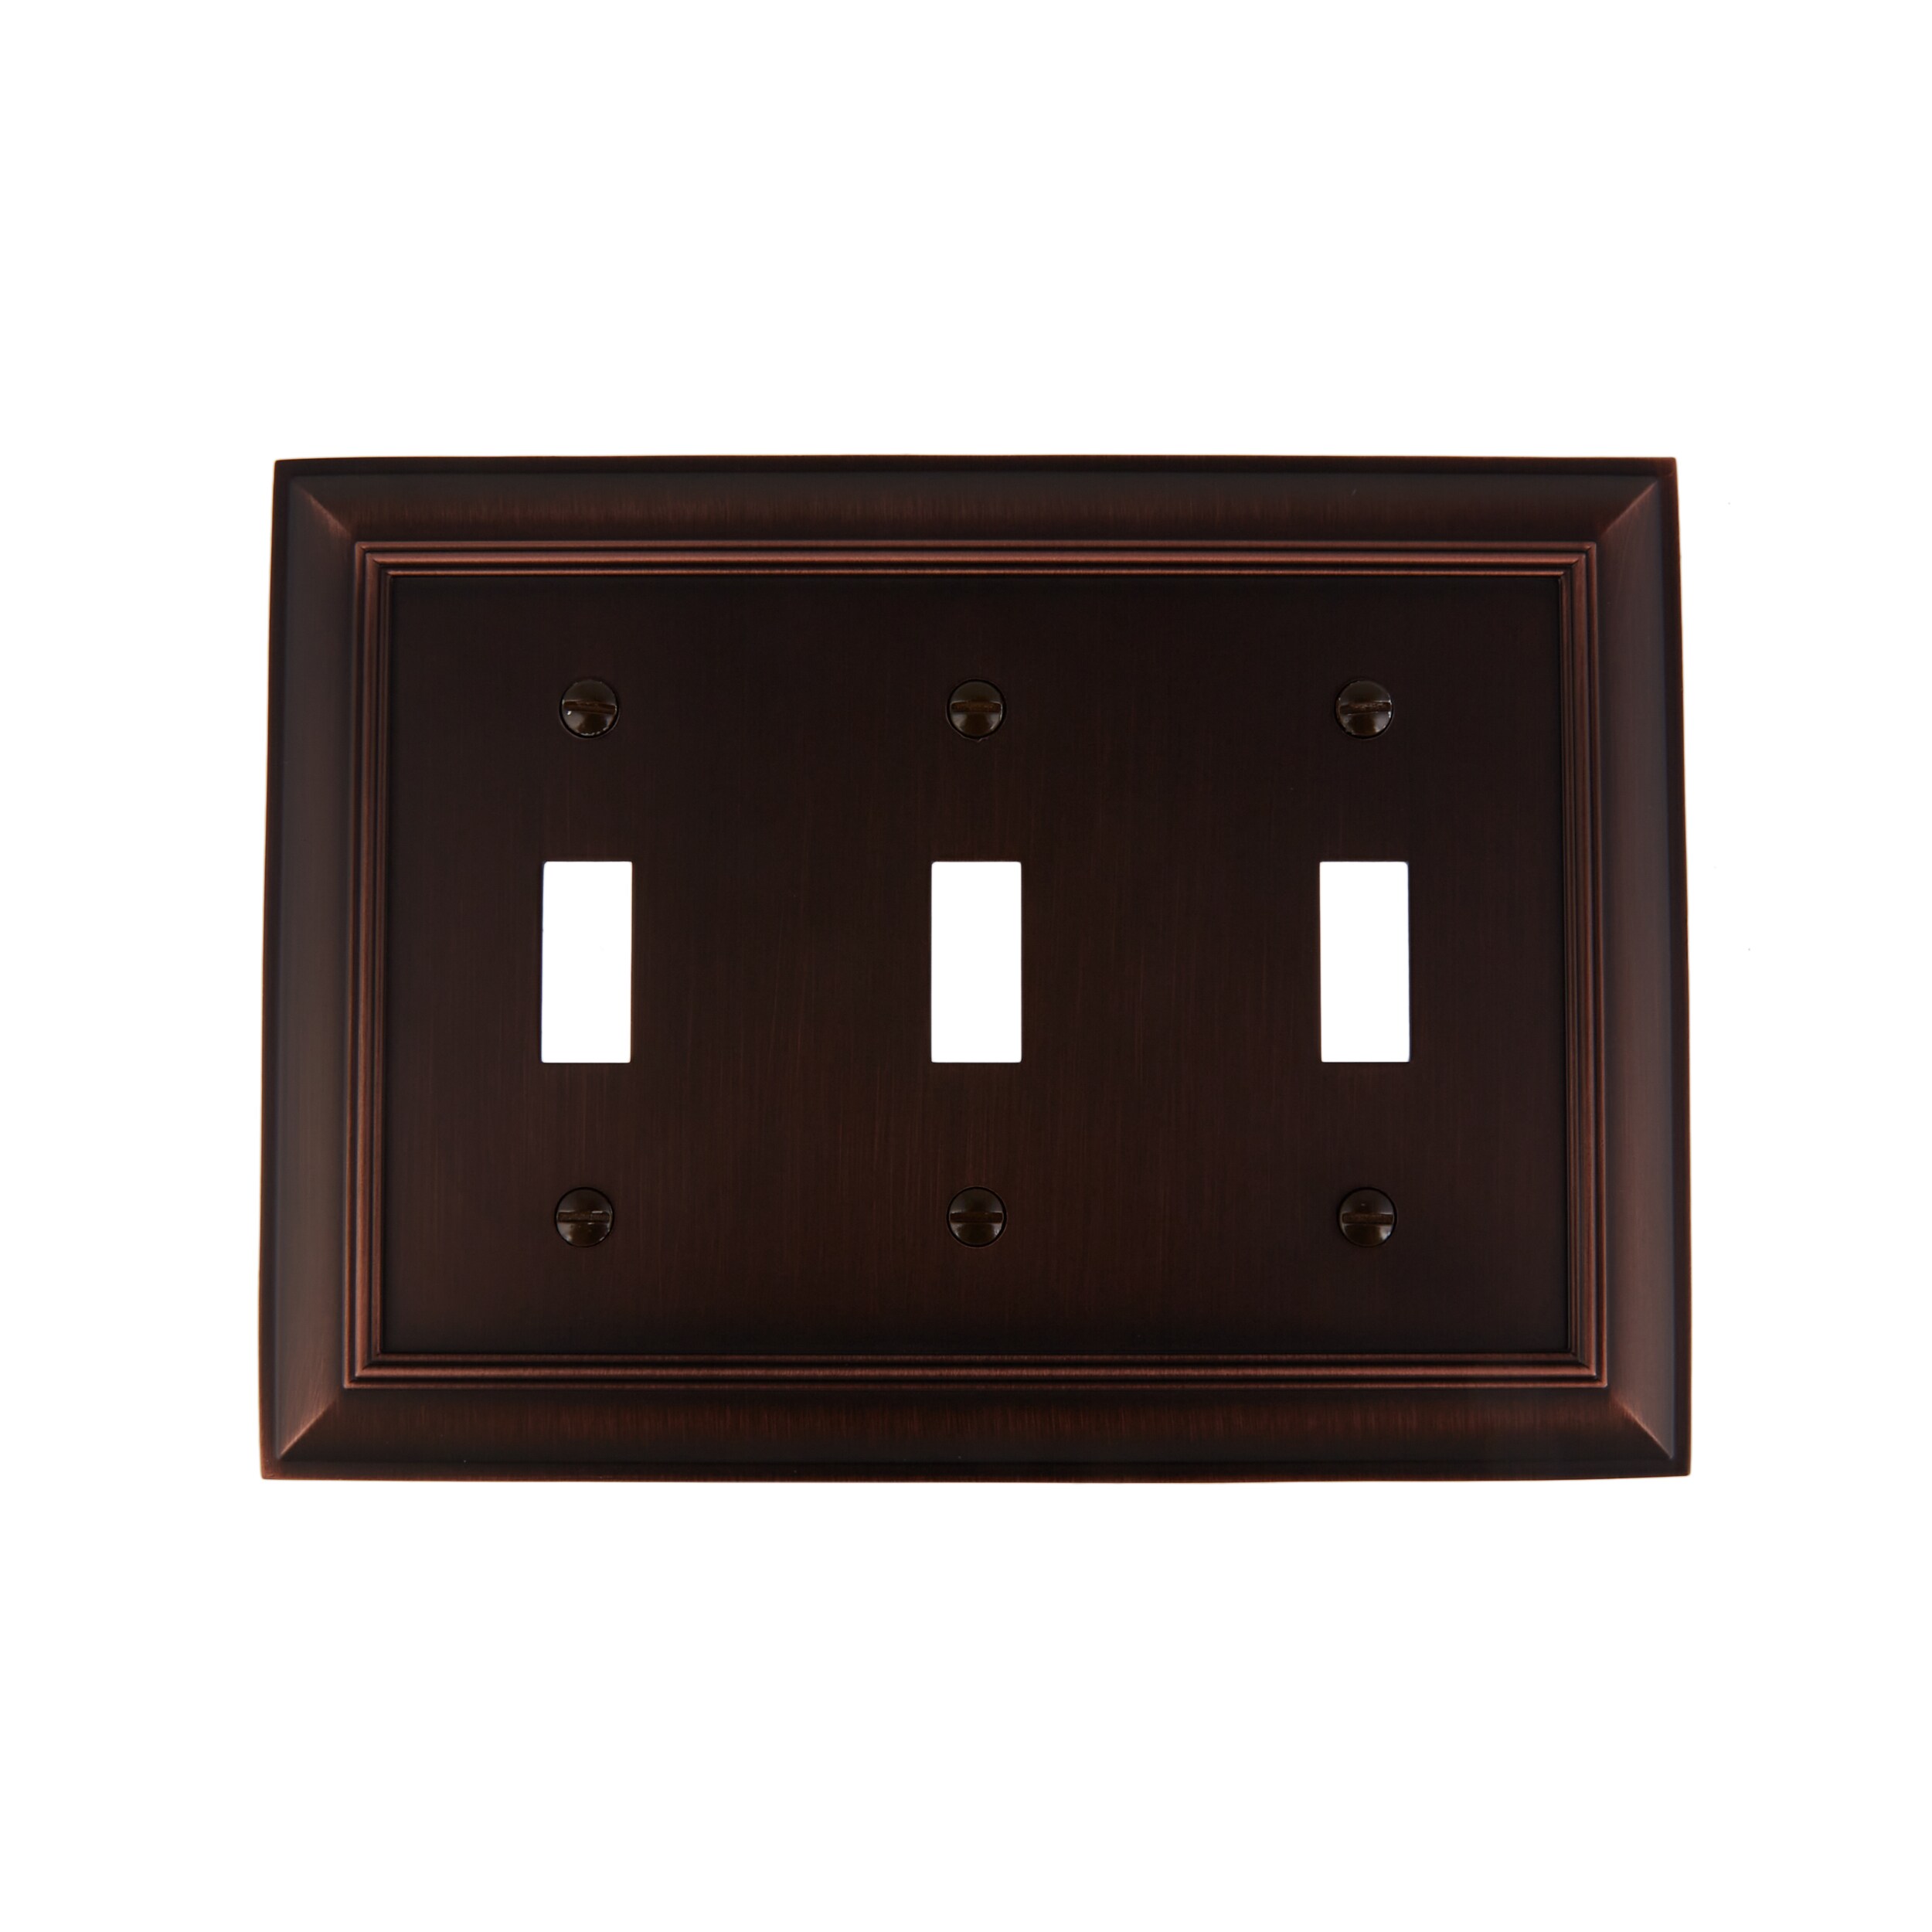 Allen Lot of 2 Roth Triple Toggle Wall Plate Dark Oil-Rubbed Bronze Finish